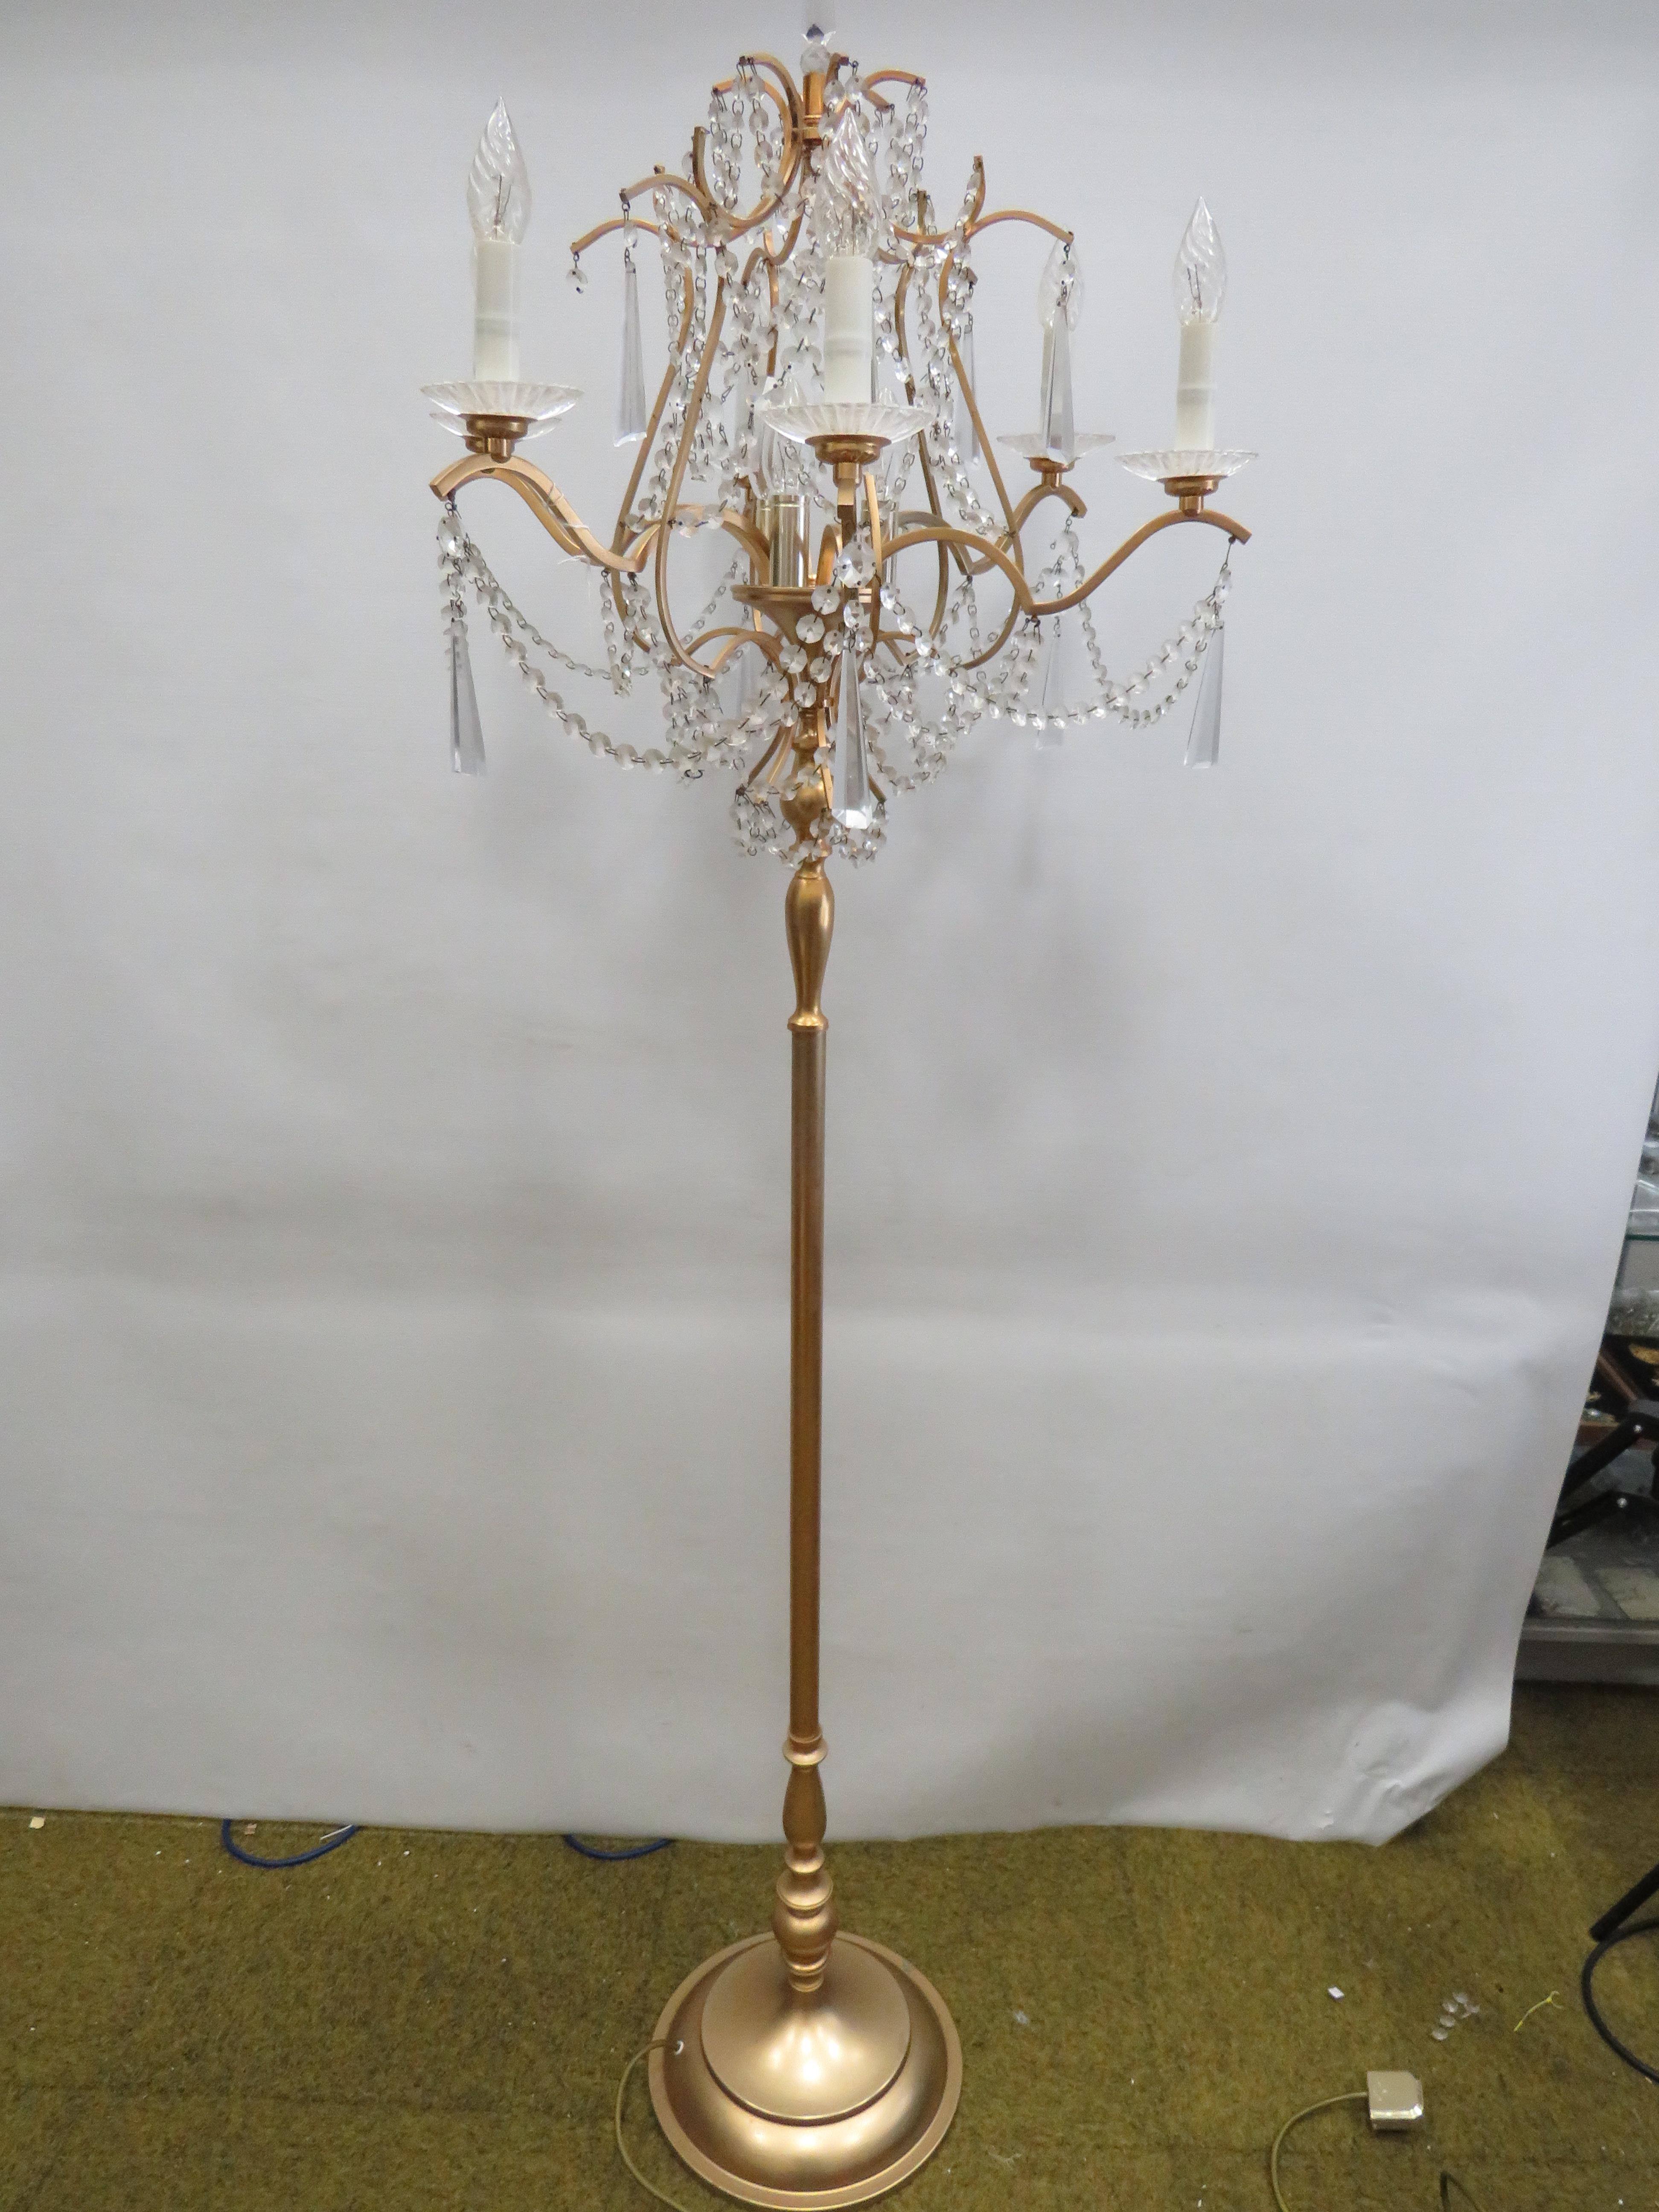 Brushed metal brass effect Standard lamp with 9 Candle bulbs and hanging glass lustres. Approx 67 in - Image 3 of 7